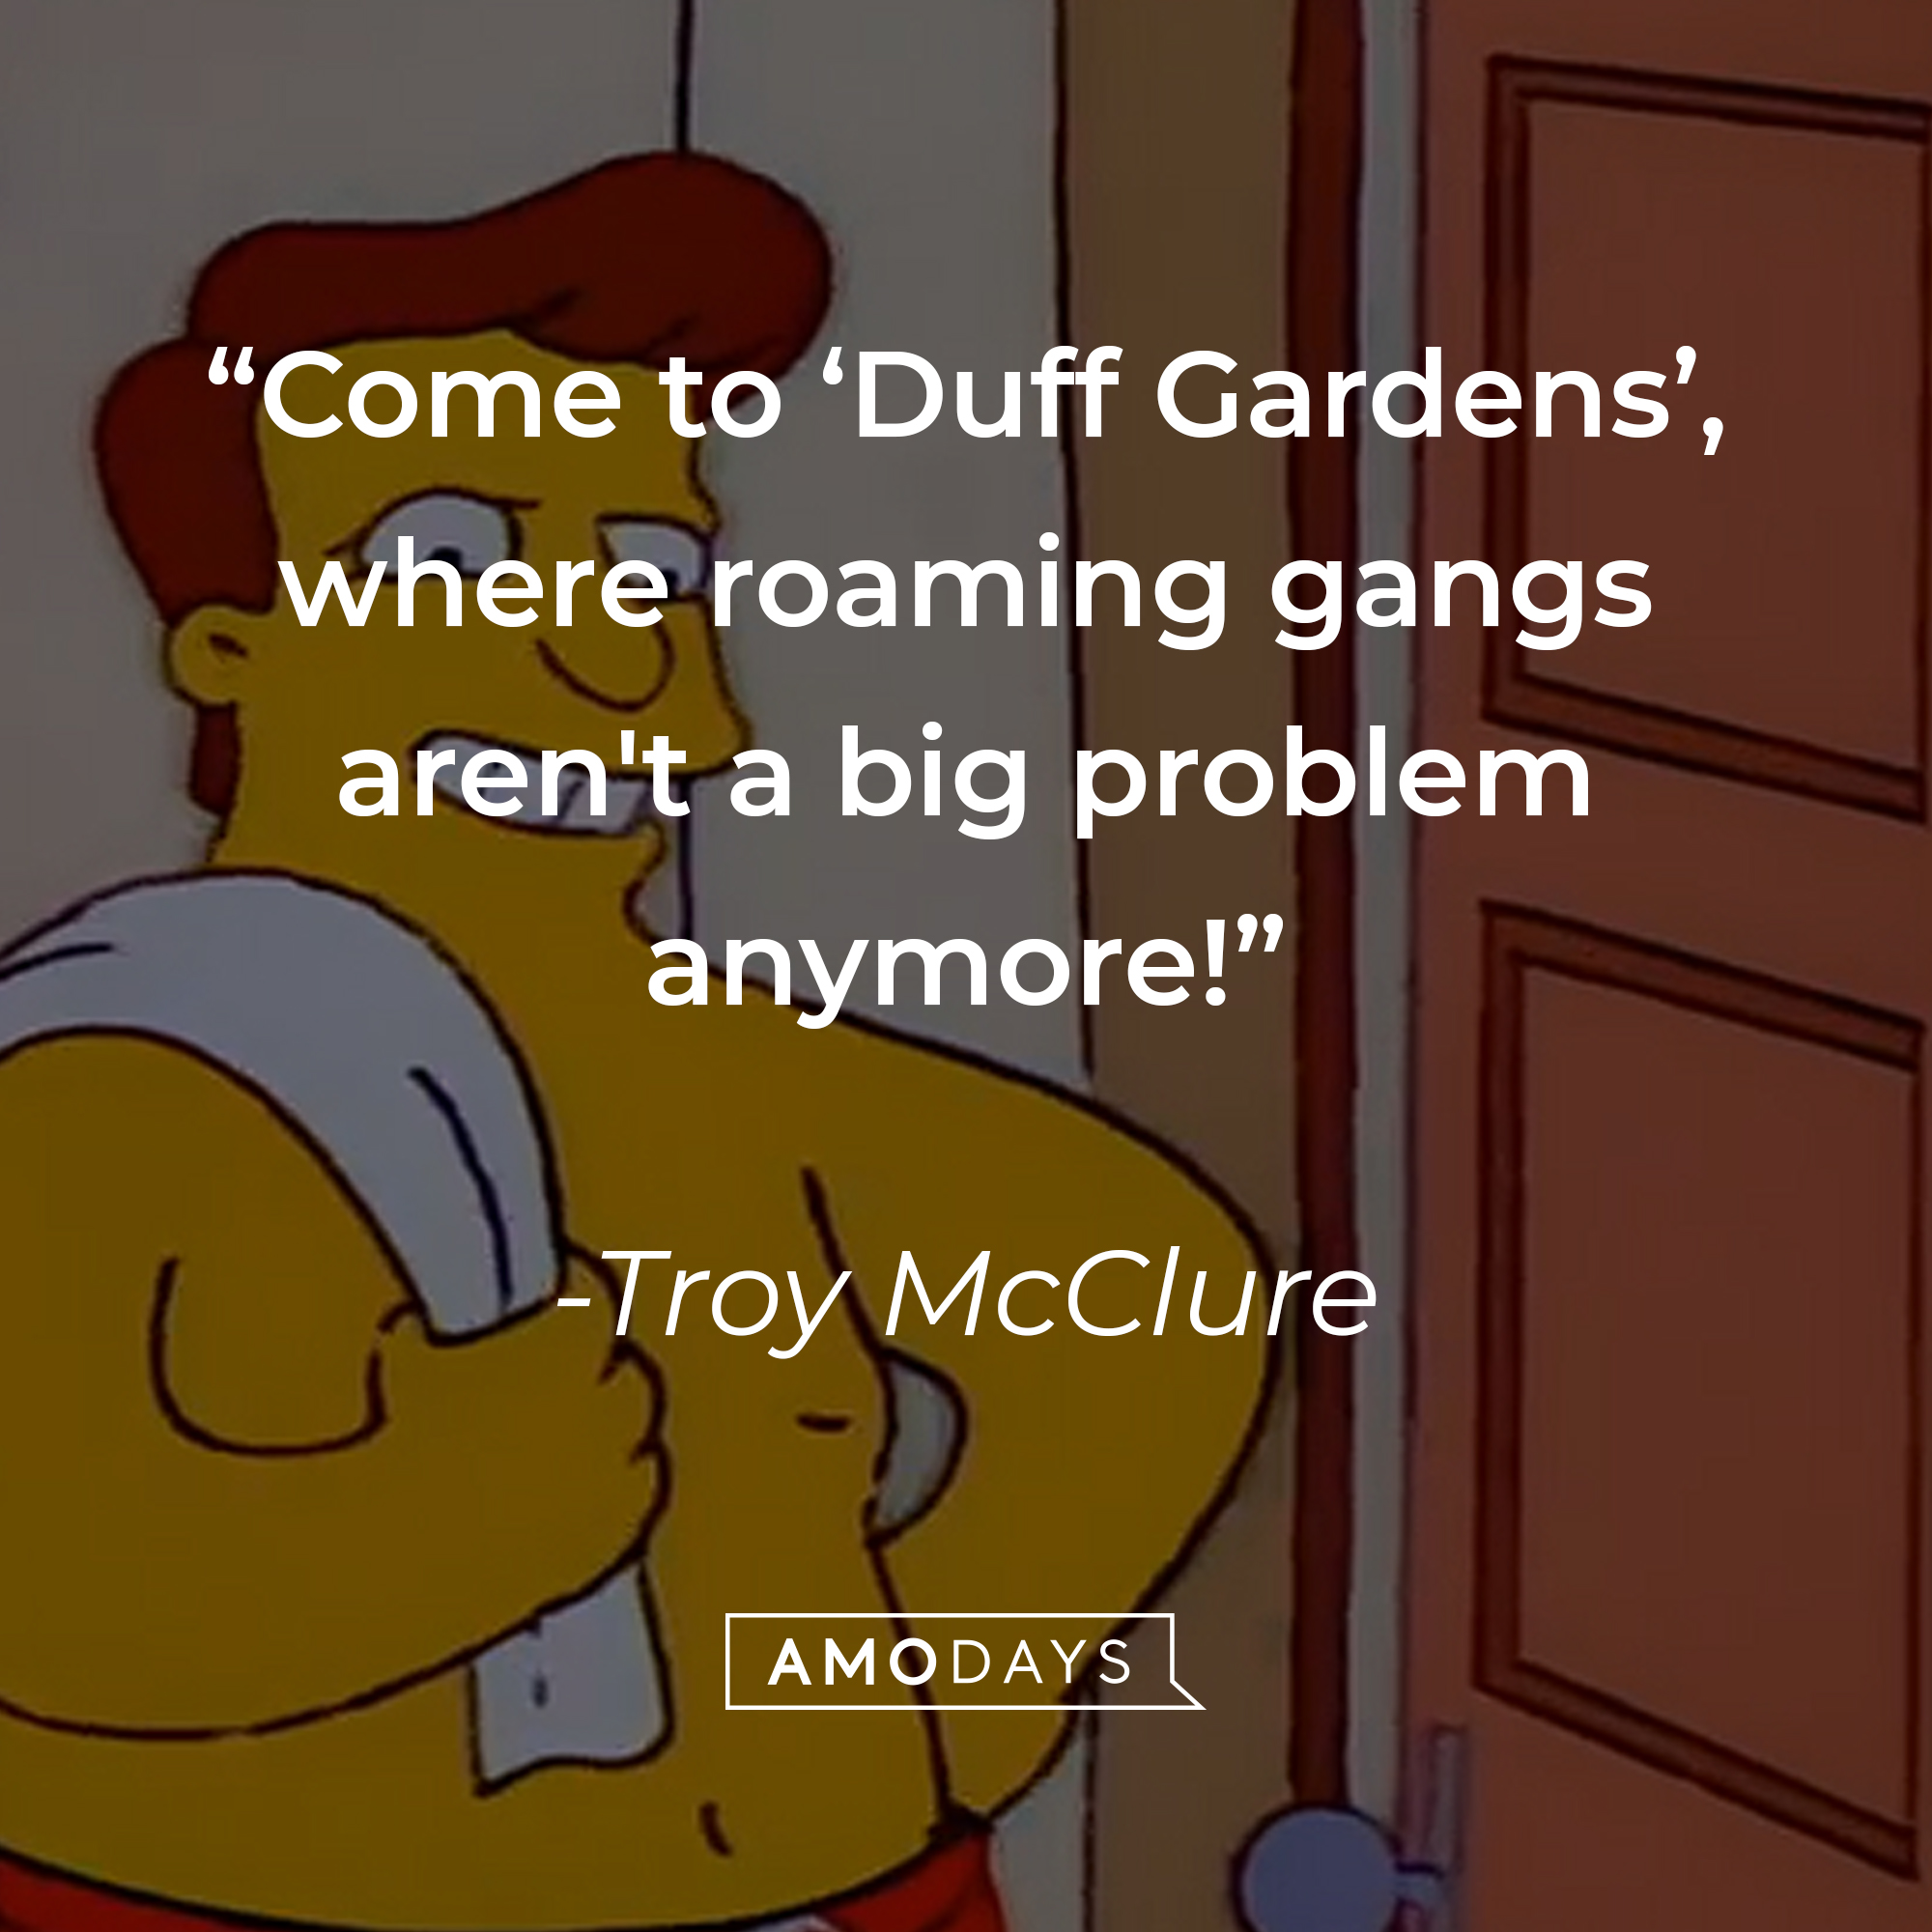 Troy McClure, with his quote: Come to ‘Duff Gardens’, where roaming gangs aren't a big problem anymore!” | Source: facebook.com/TheSimpsons